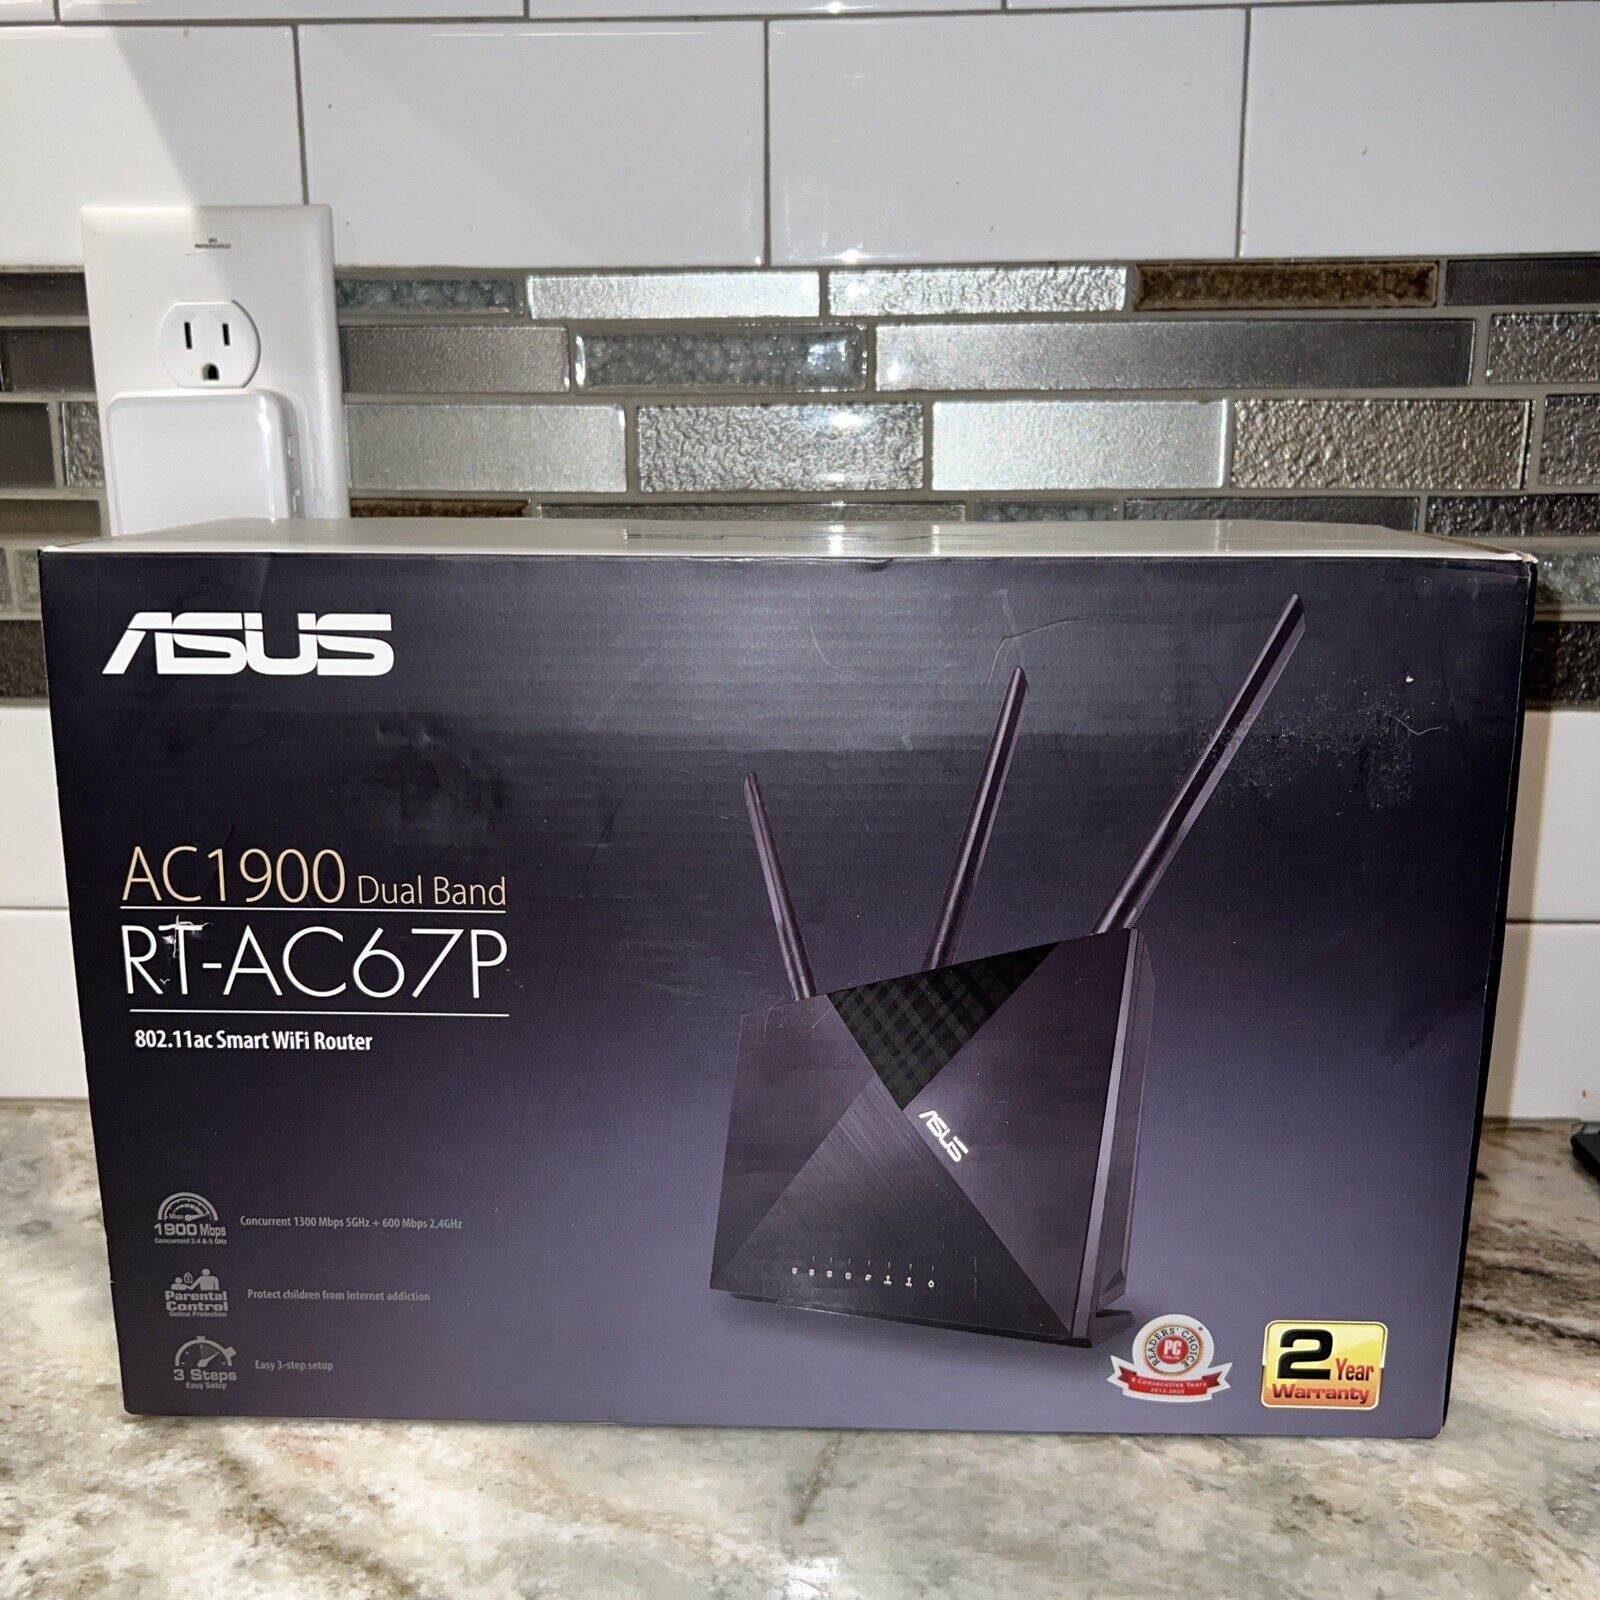 ASUS AC1900 Dual Band RT-AC67P Smart WiFi Router